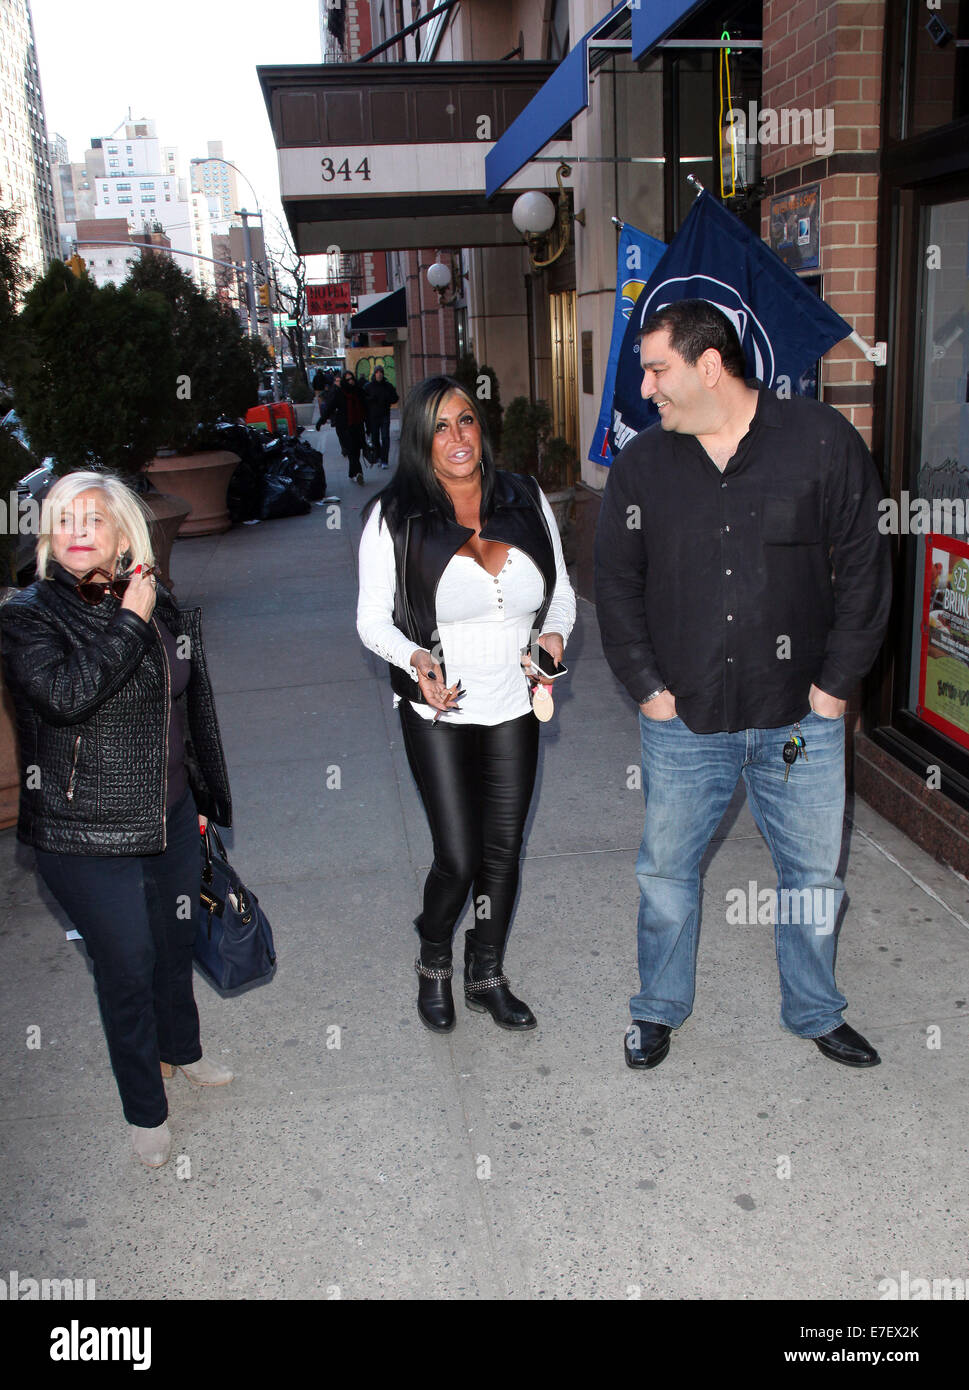 VH1 Mobwives Star Big Ang hosts the Bottomz Up Best New York City Bartender Contest at Bottomz Up Bar & Grill  Featuring: Sandy Wright,Big Ang Raiola,Eddie Fahmy Where: New York City, New York, United States When: 13 Mar 2014 Stock Photo